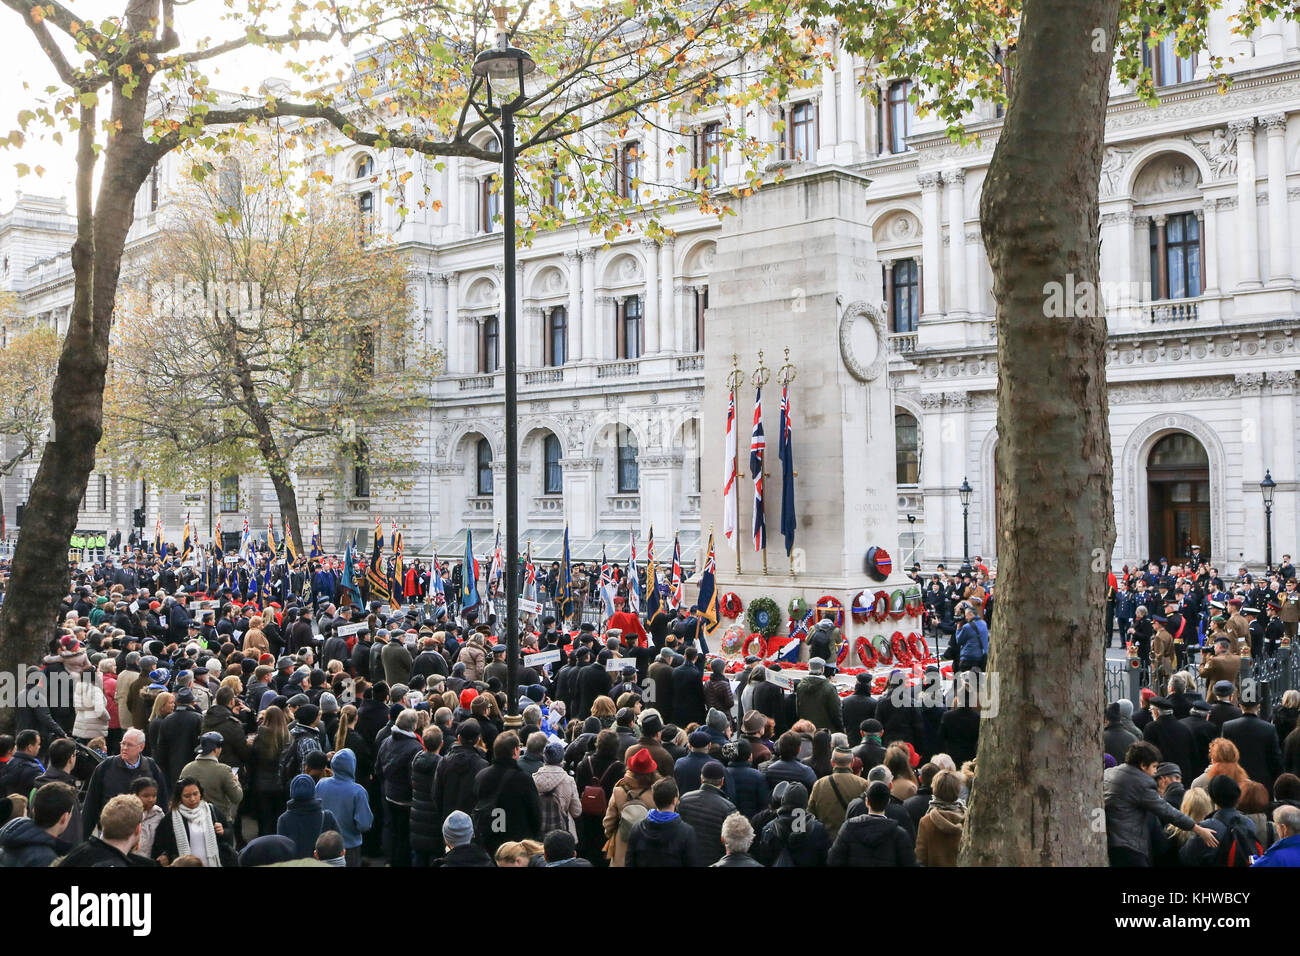 London UK. 19th November 2017. Annual ceremony  for Jewish Ex Servicemen and Women Whitehall was held at the Cenotaph in Whitehall to commemorate the sacrifices made in two world wars Credit: amer ghazzal/Alamy Live News Credit: amer ghazzal/Alamy Live News Stock Photo